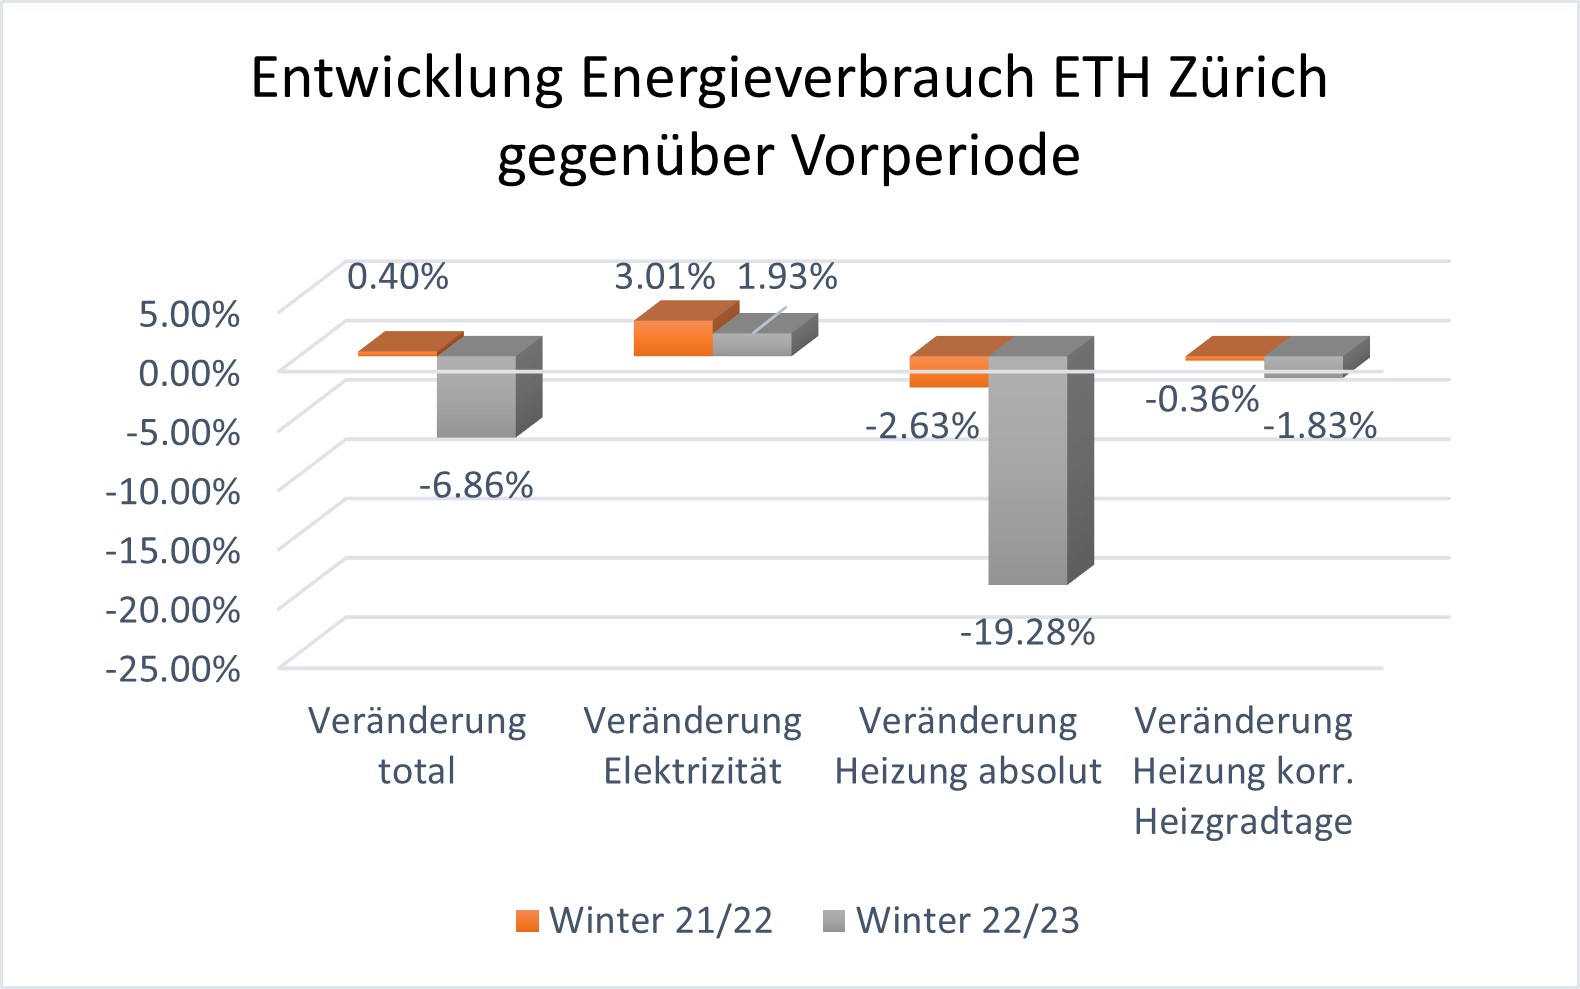 Enlarged view: Development of energy consumption at ETH Zurich compared to previous period